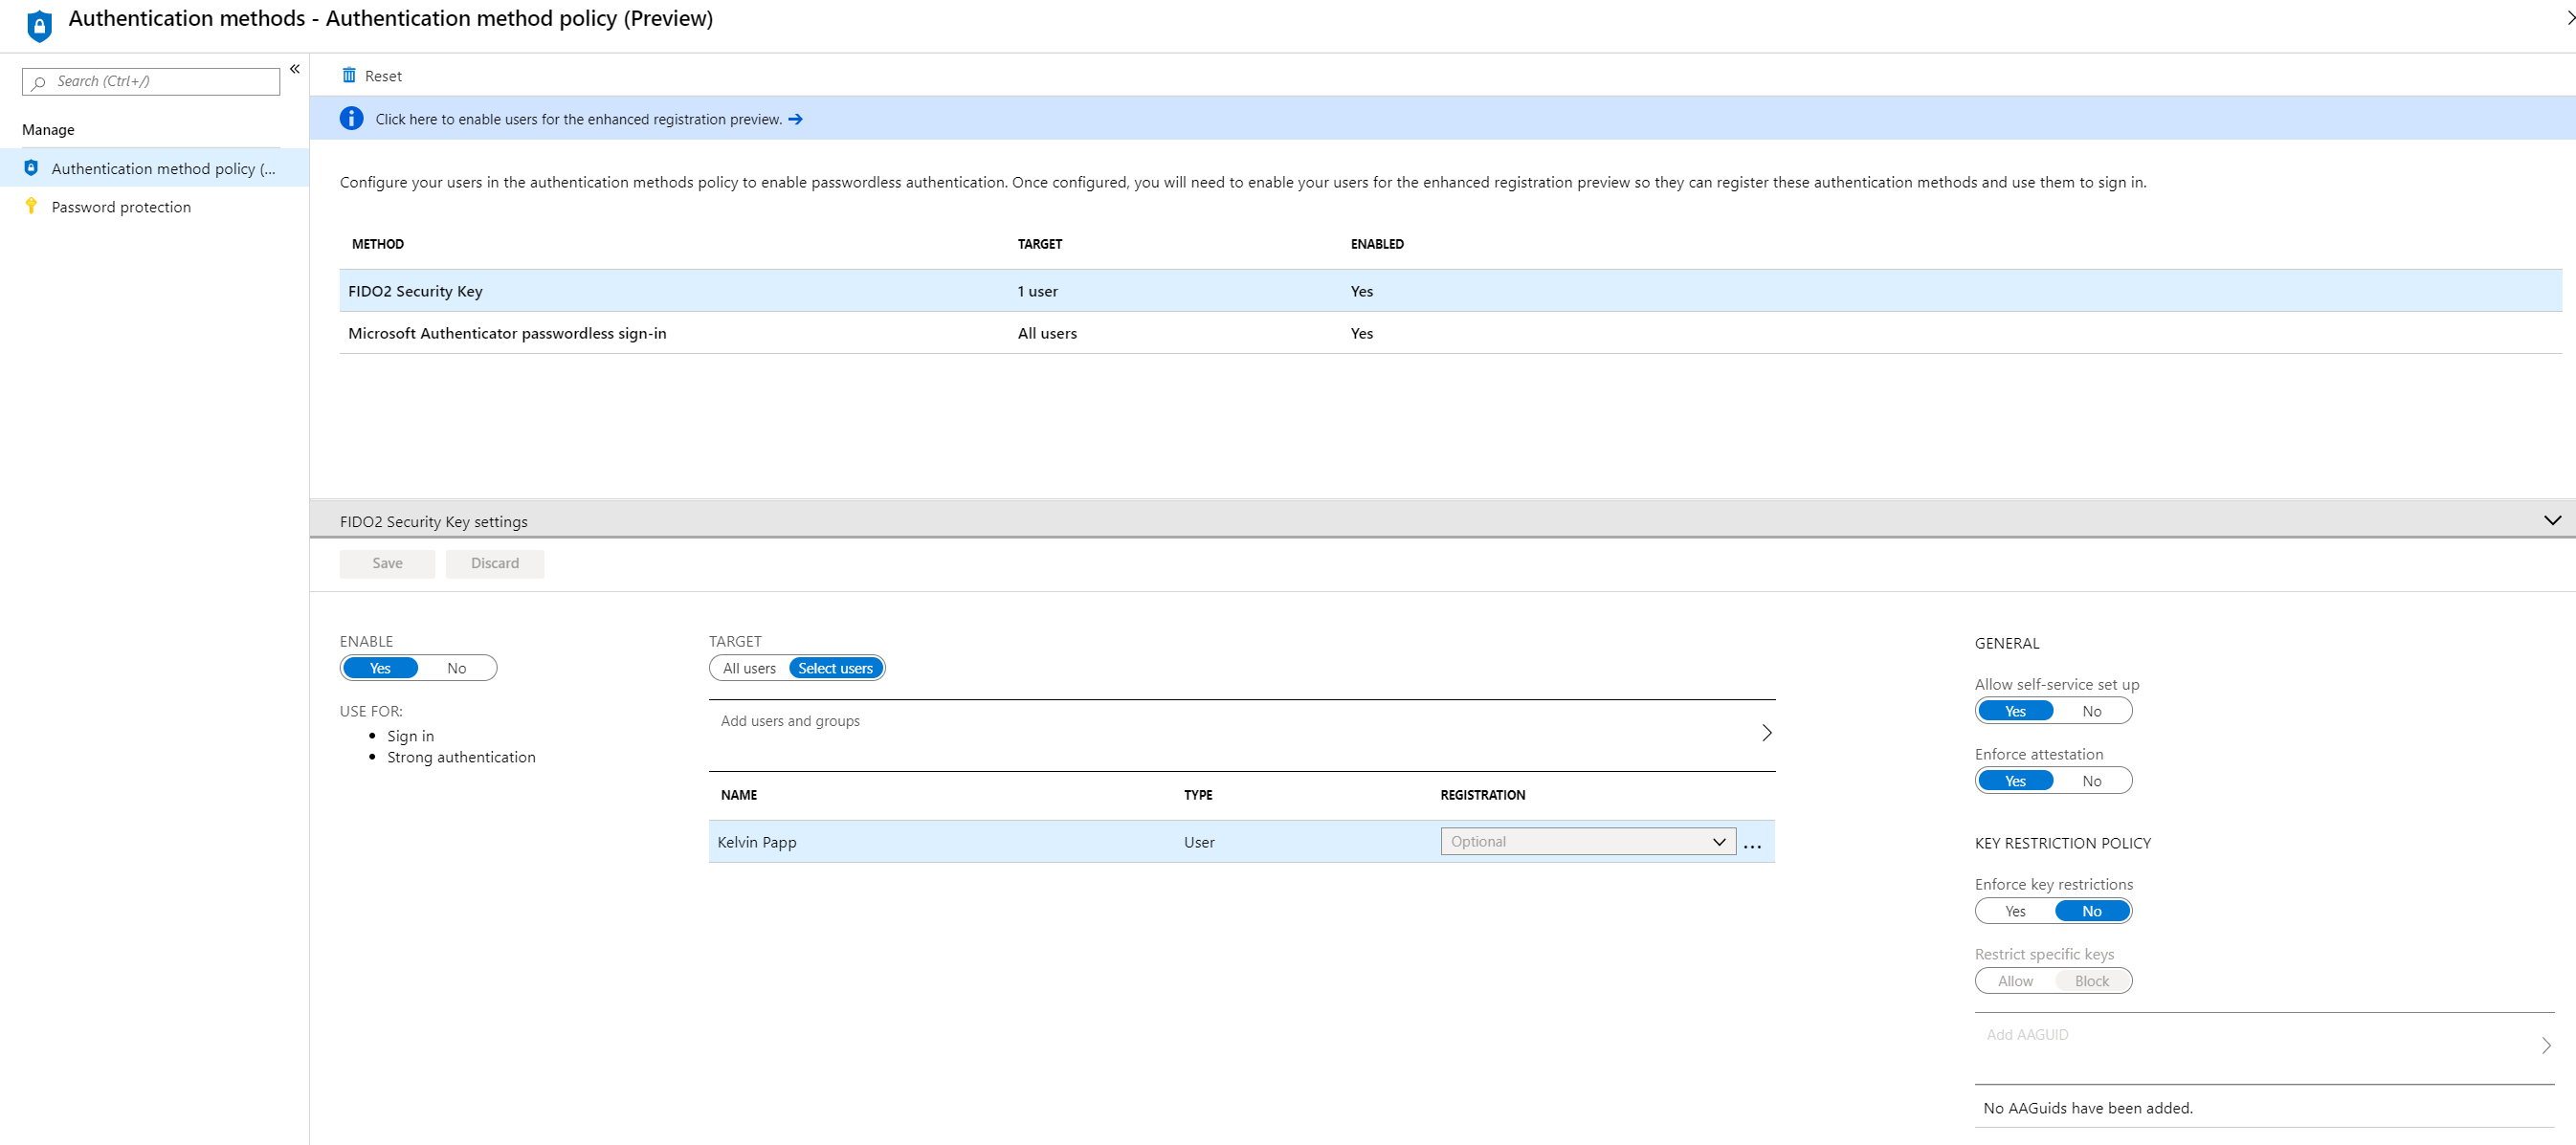 A creenshot from the Azure AD portal depicting the available passwordless sign-in options, and associated users